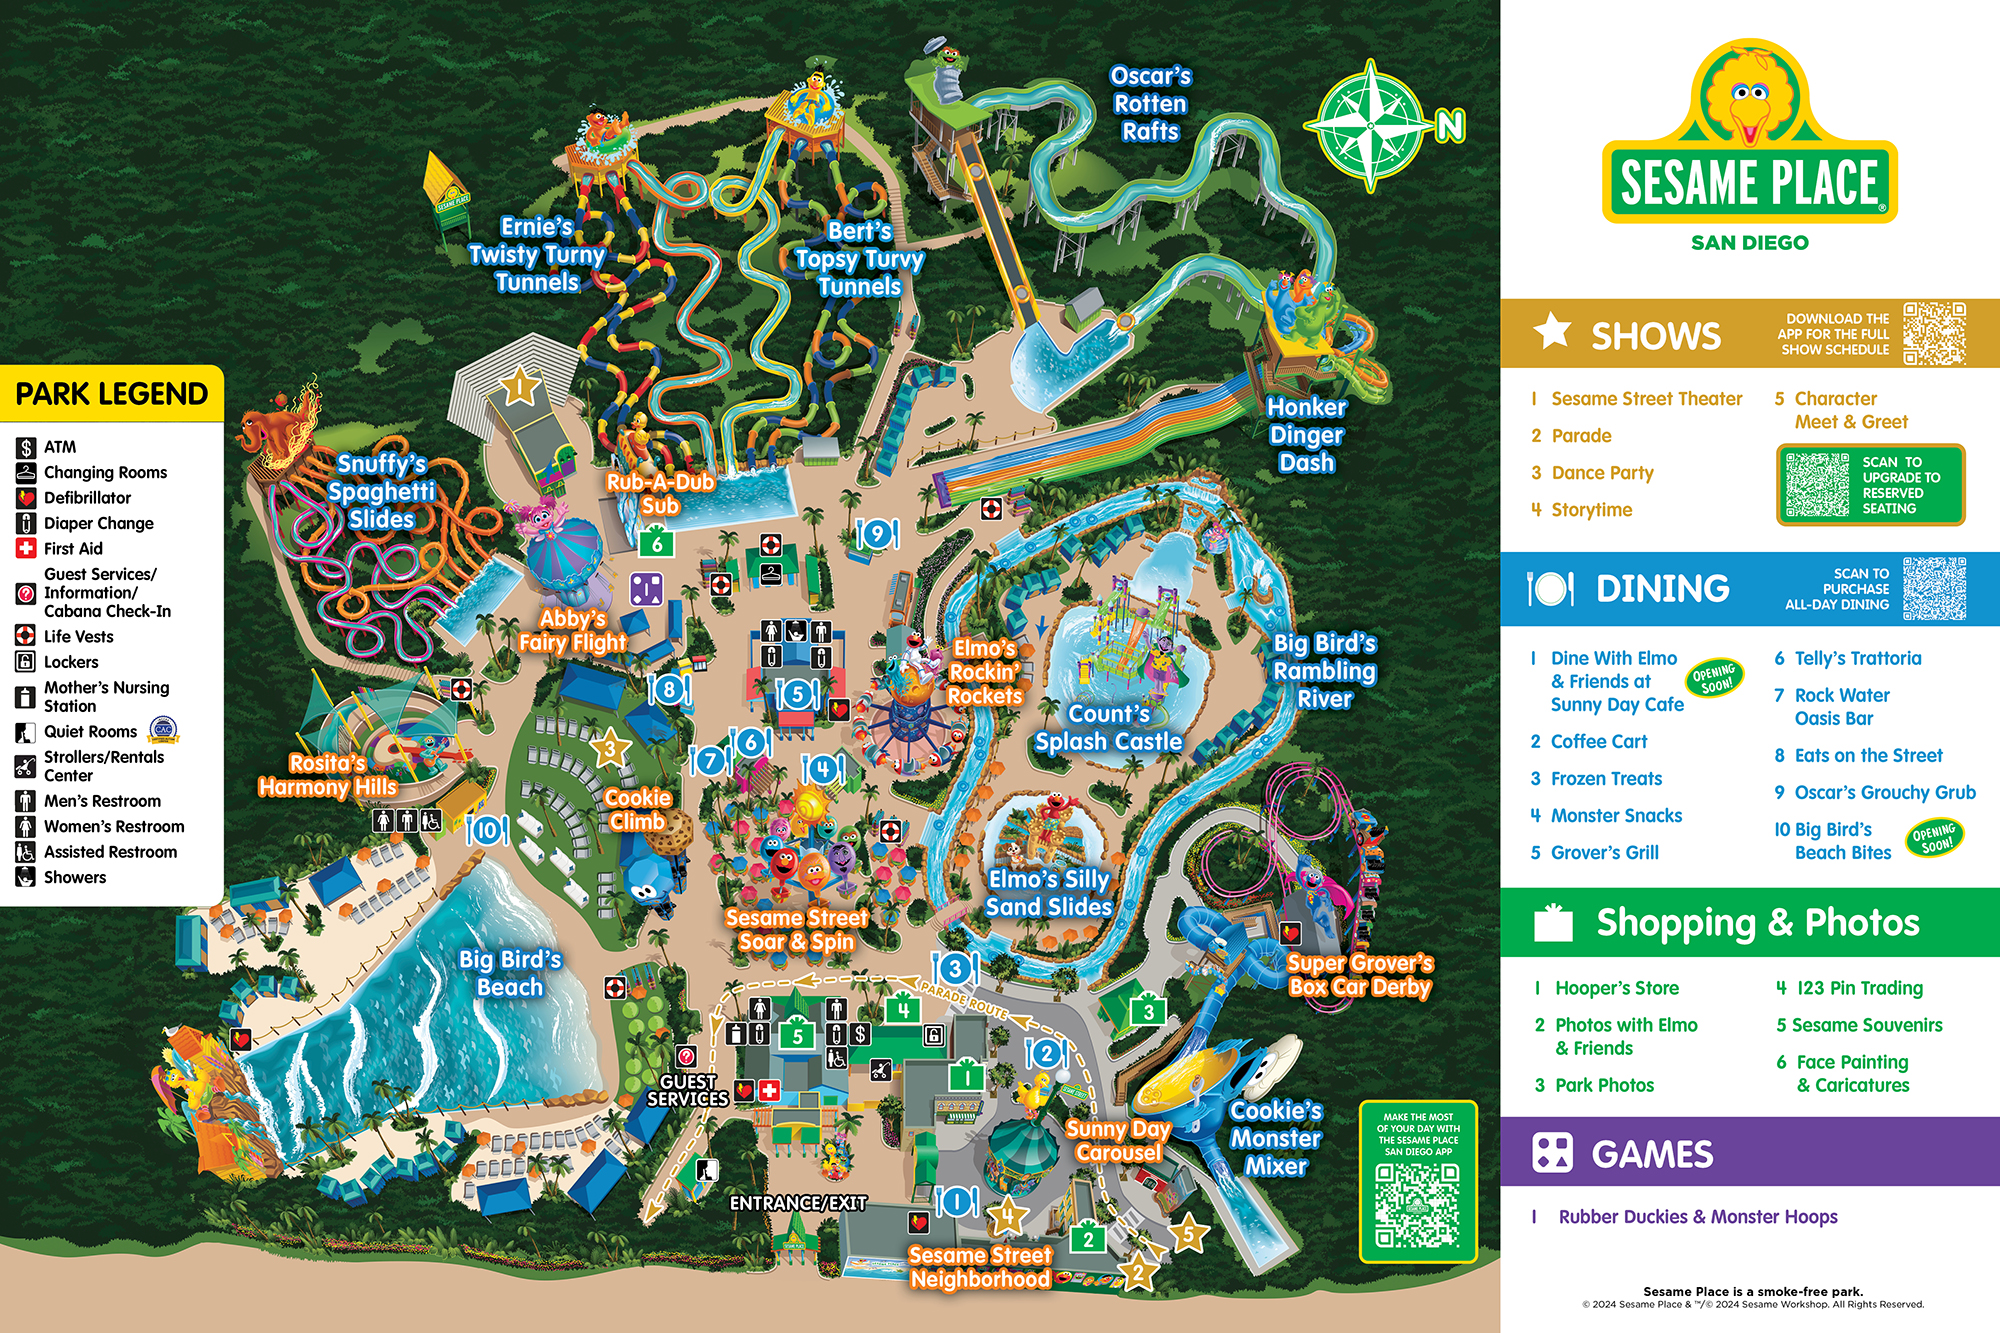 /san-diego/-/media/commercial/sesame-place-san-diego/park-maps/spcmap1001inparkdirectionalmapmaster031224ds31824.jpg